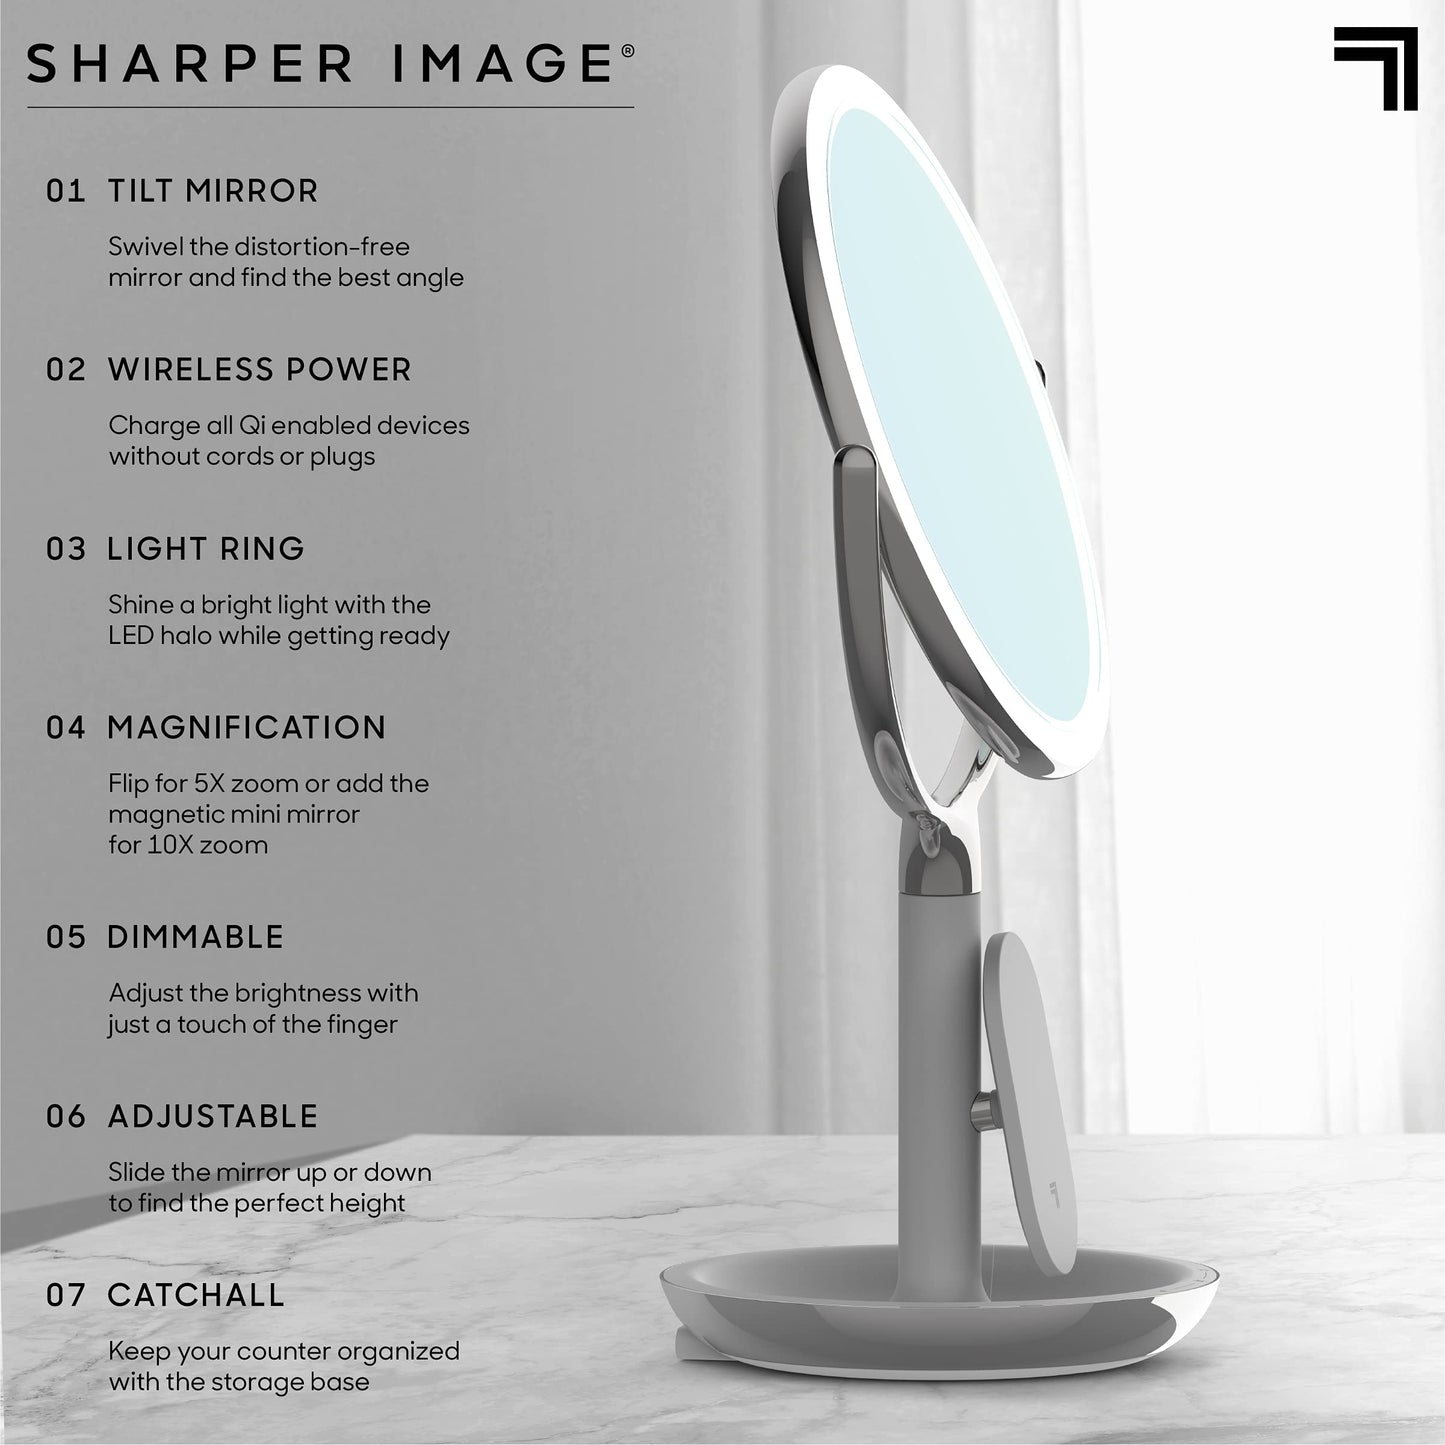 Sharper Image® SpaStudio™ 8” Vanity Mirror - Wireless Qi Charging Pad, Dimmable LED Halo Light Ring, 10X & 5X Magnification, Cosmetic Makeup Skincare Essential, Aesthetic Room Desk Decor Storage